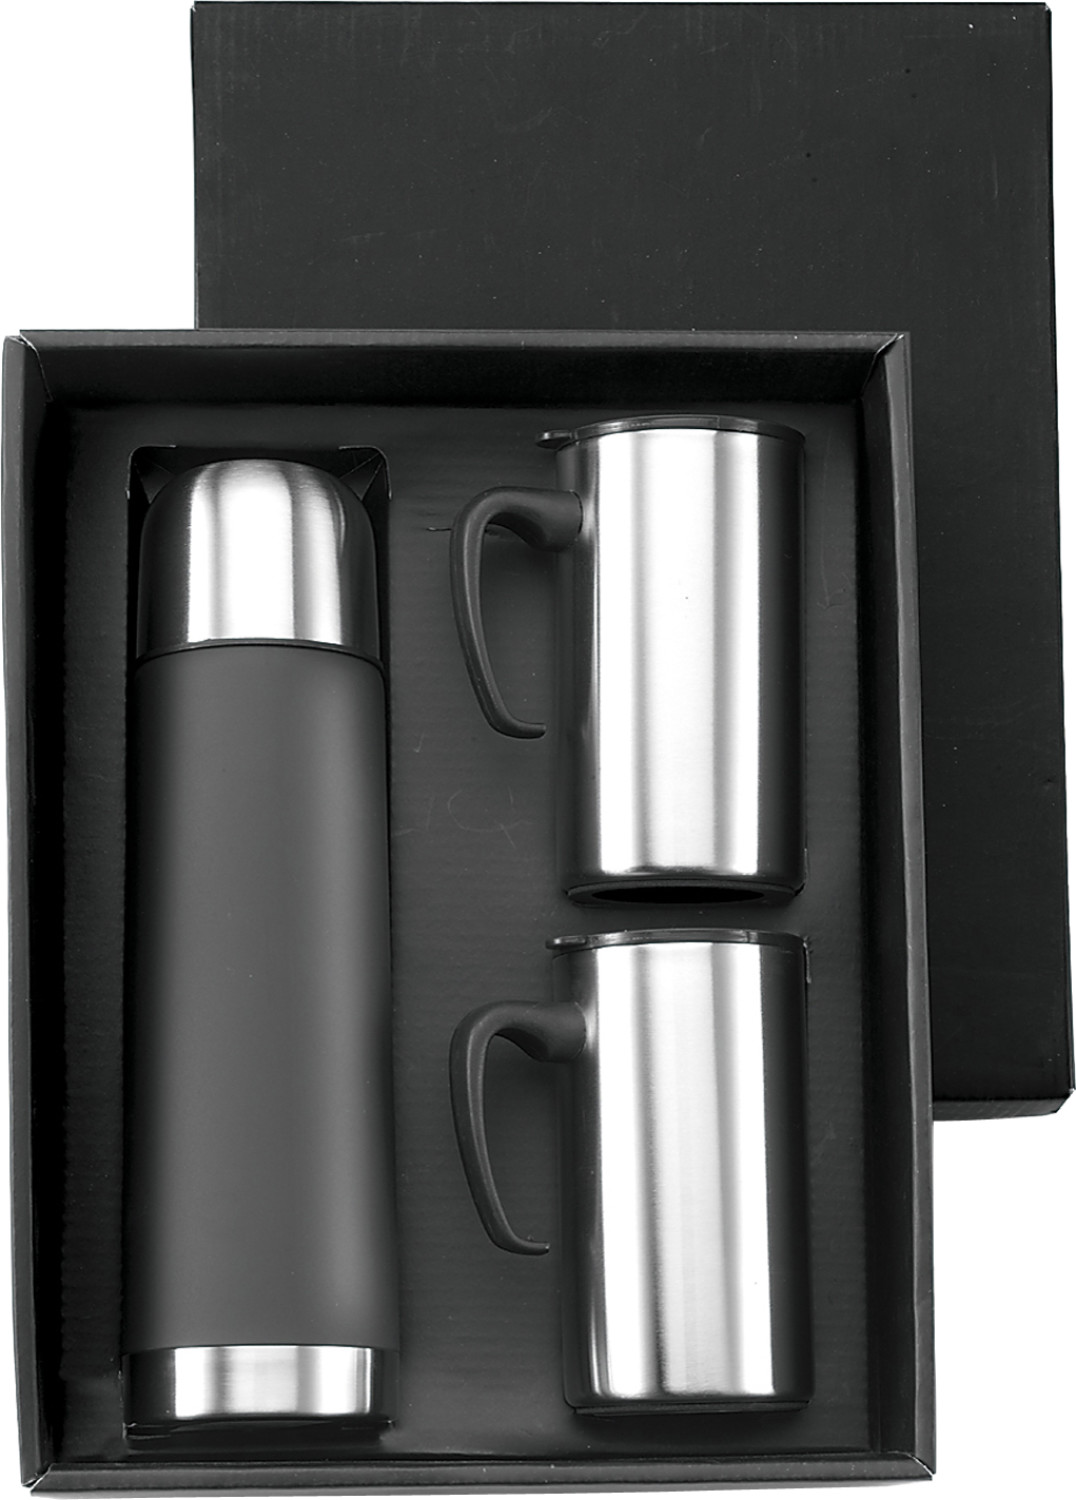 Vacuum flask set. Zippo 3-in-1 Thermos Flask.